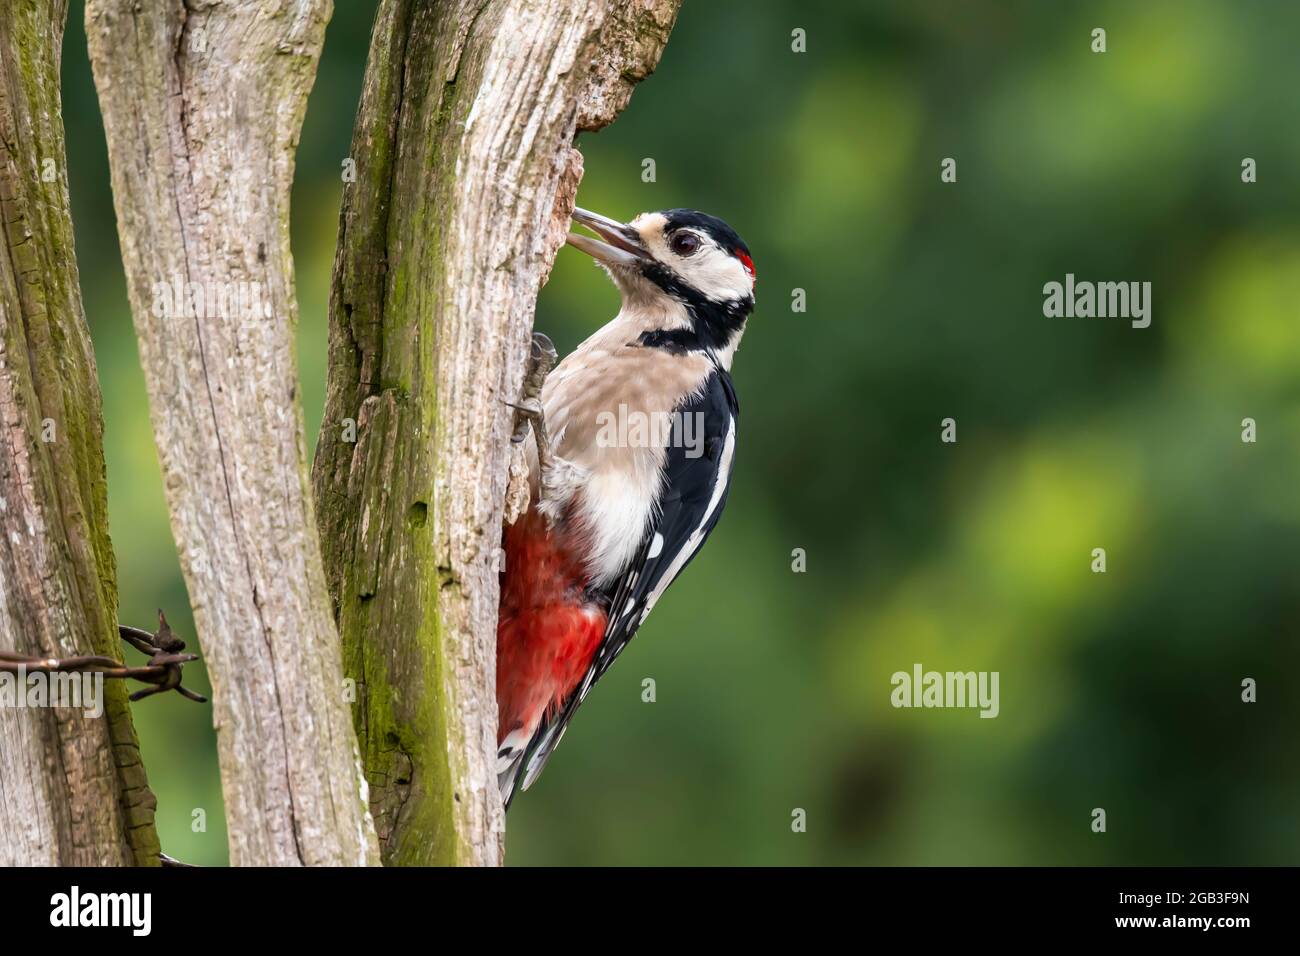 A great spotted woodpecked looking for food on an old wooden post in norfolk Stock Photo